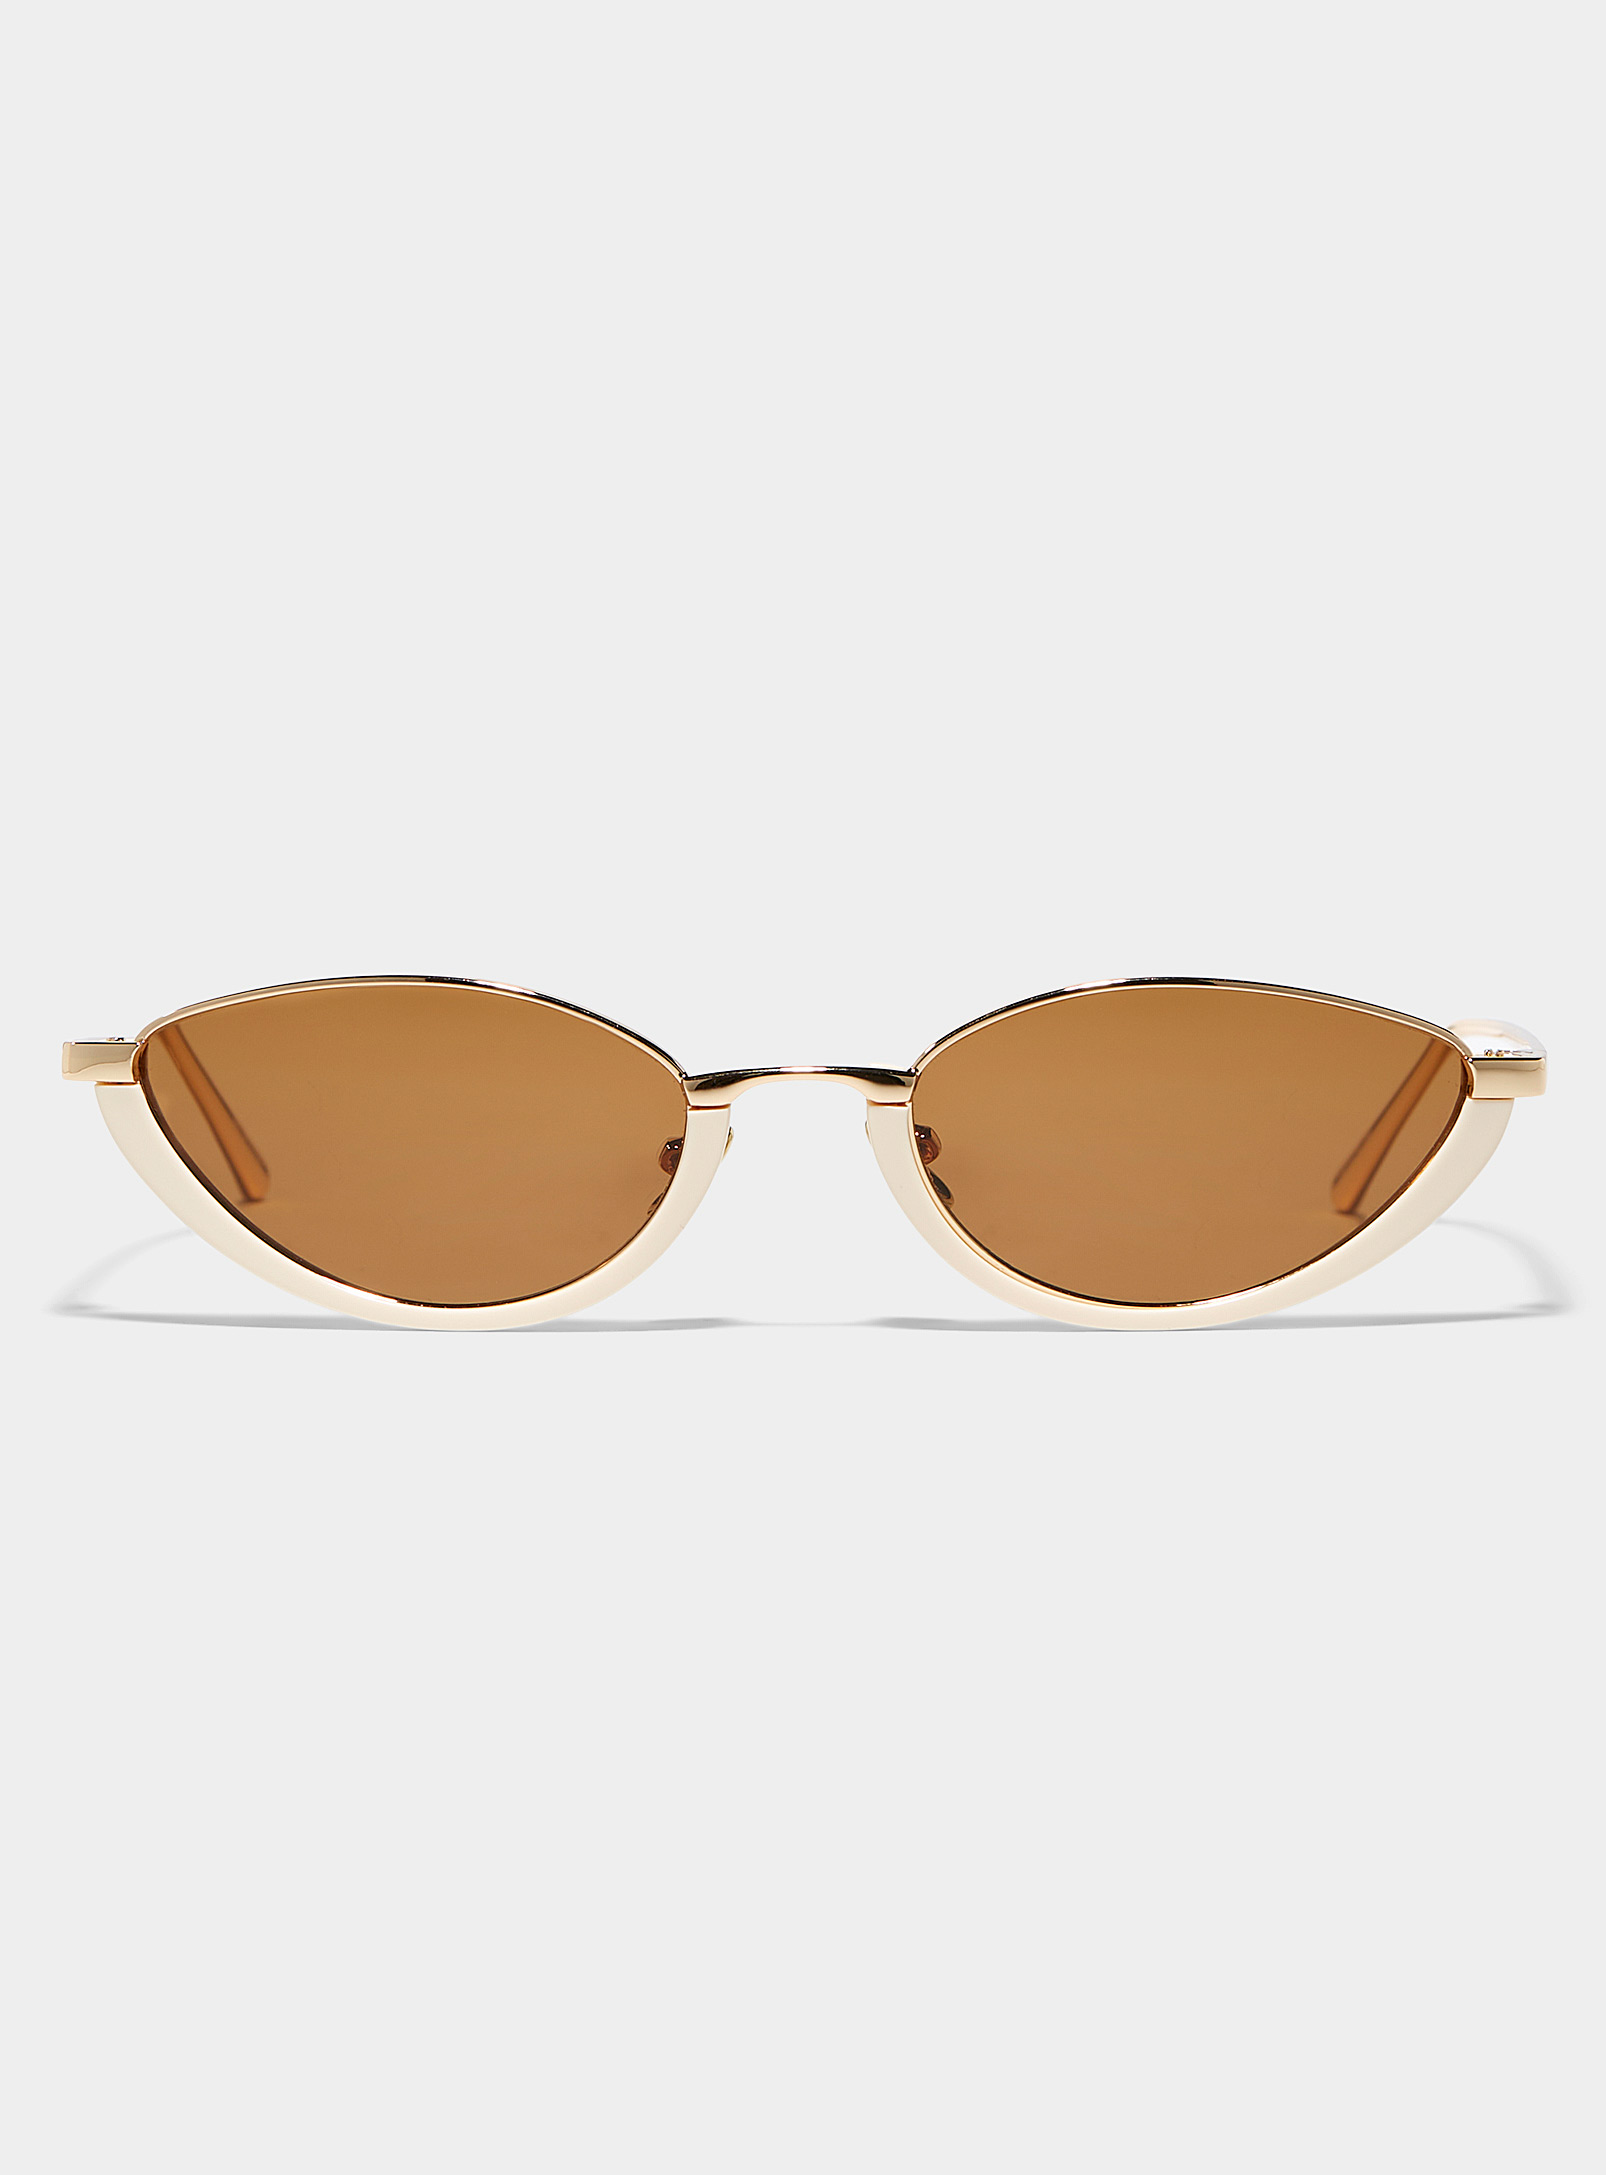 French Kiwis Tortoiseshell-accent Small Oval Metallic Sunglasses In Brown